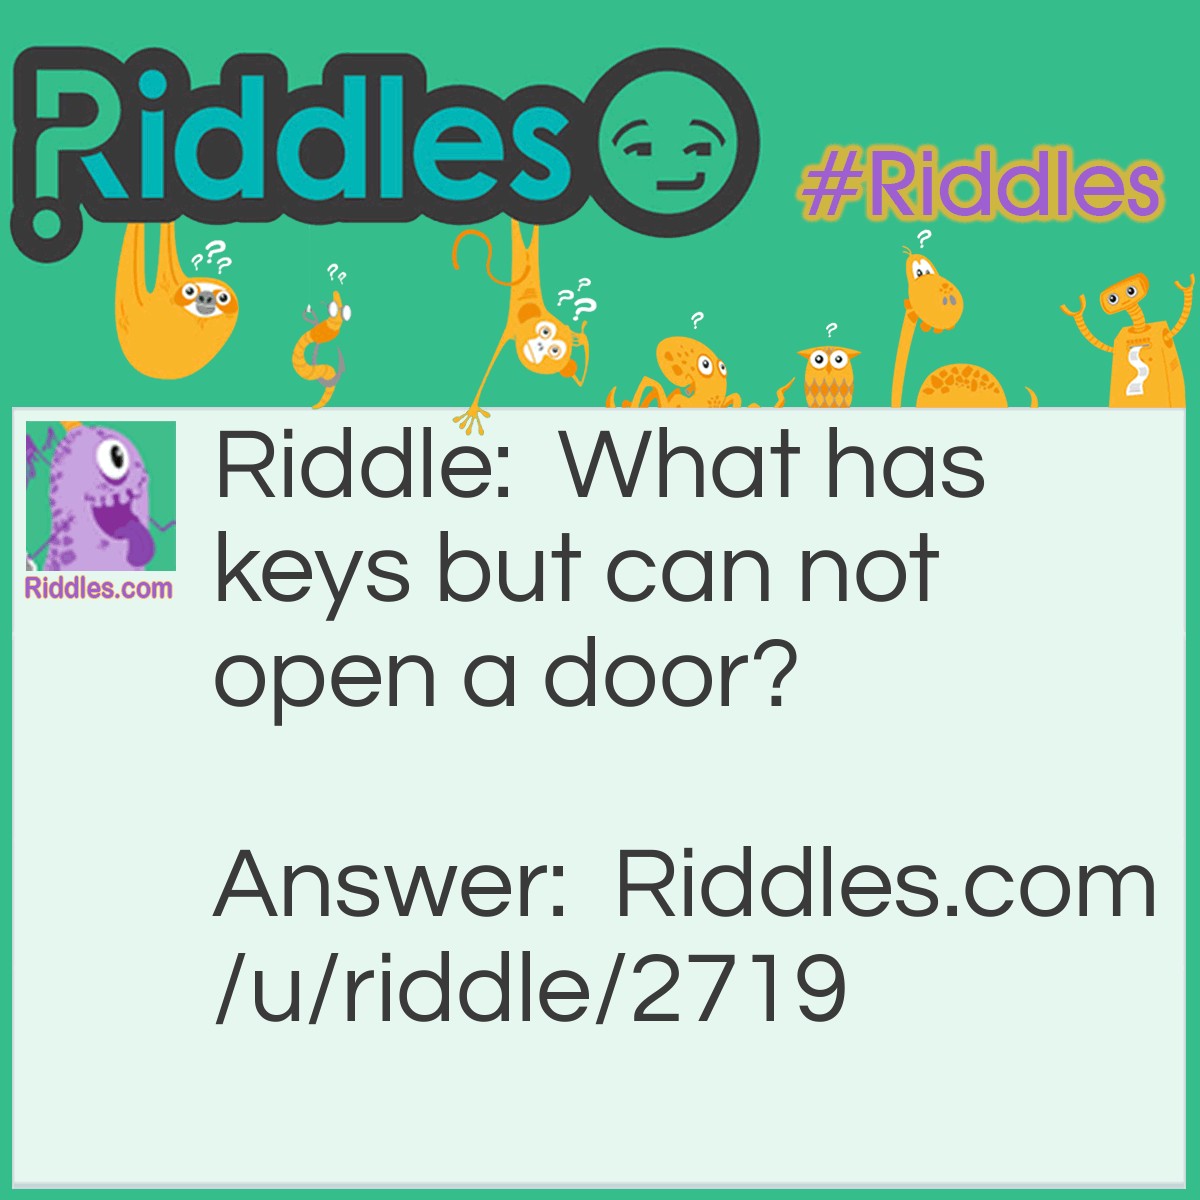 Riddle: What has keys but can not open a door? Answer: A piano.